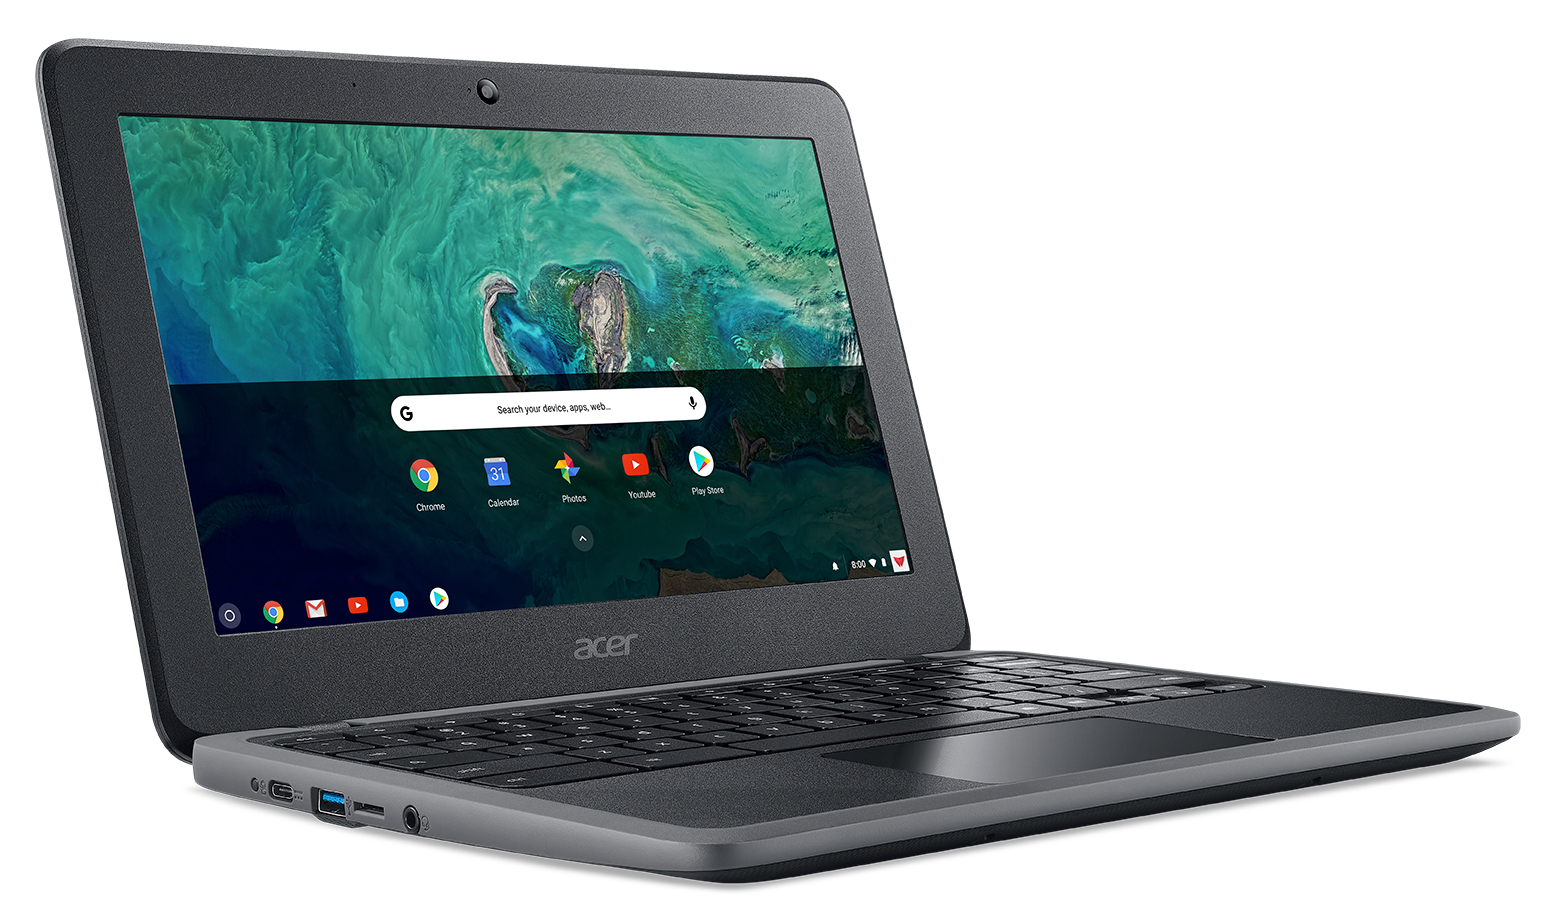 The Asus Chromebook 11.